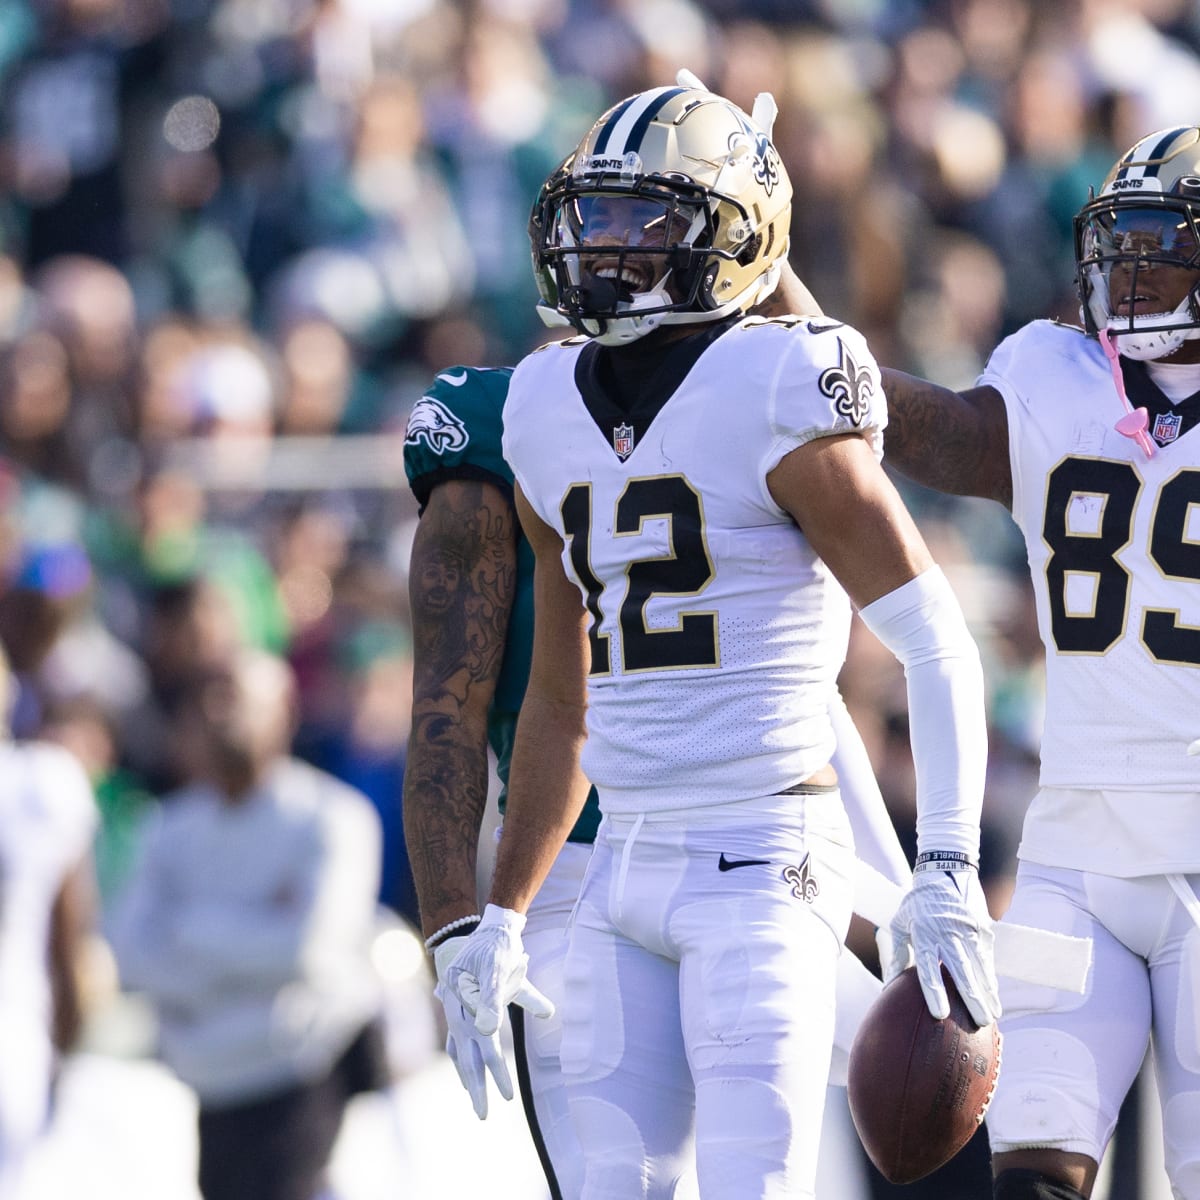 New Orleans Saints cornerback Alontae Taylor finding right fit in the slot